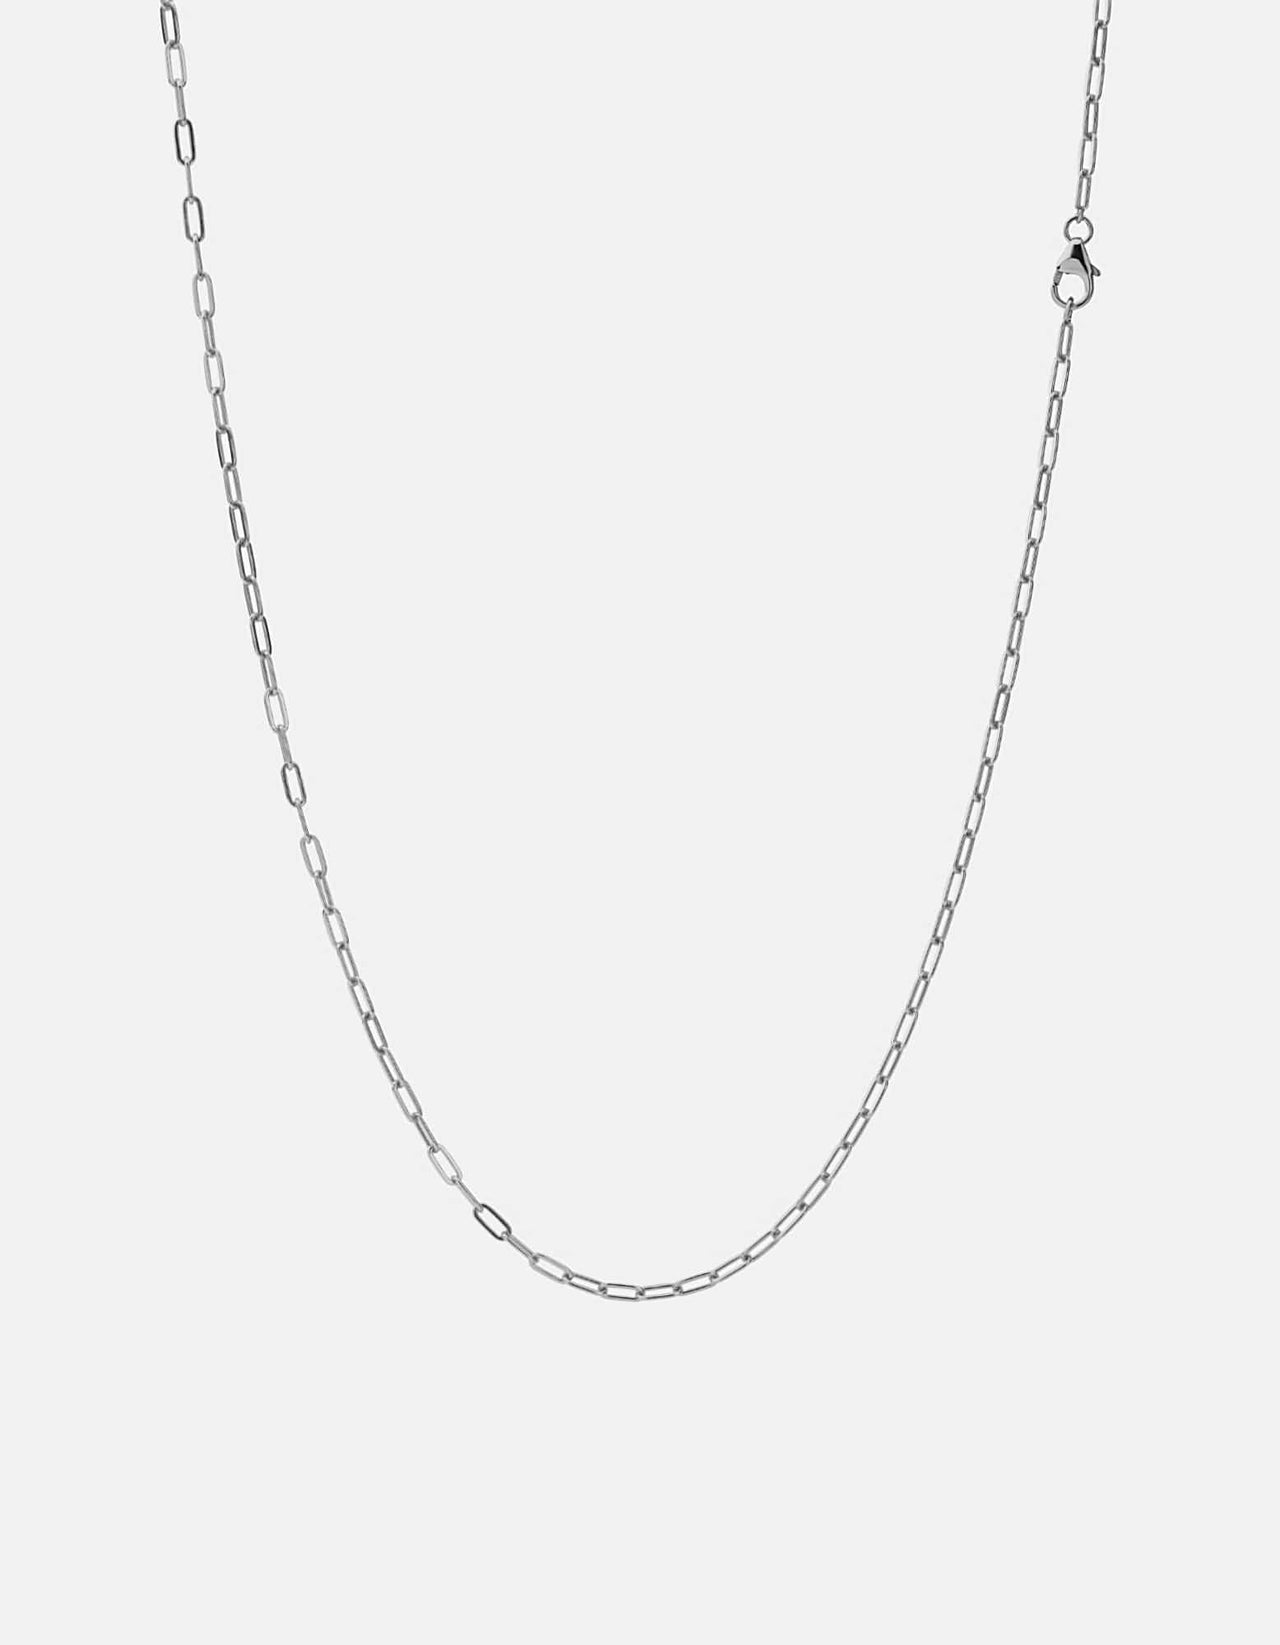 Diamond Accent Infinity Necklace in Sterling Silver | Zales